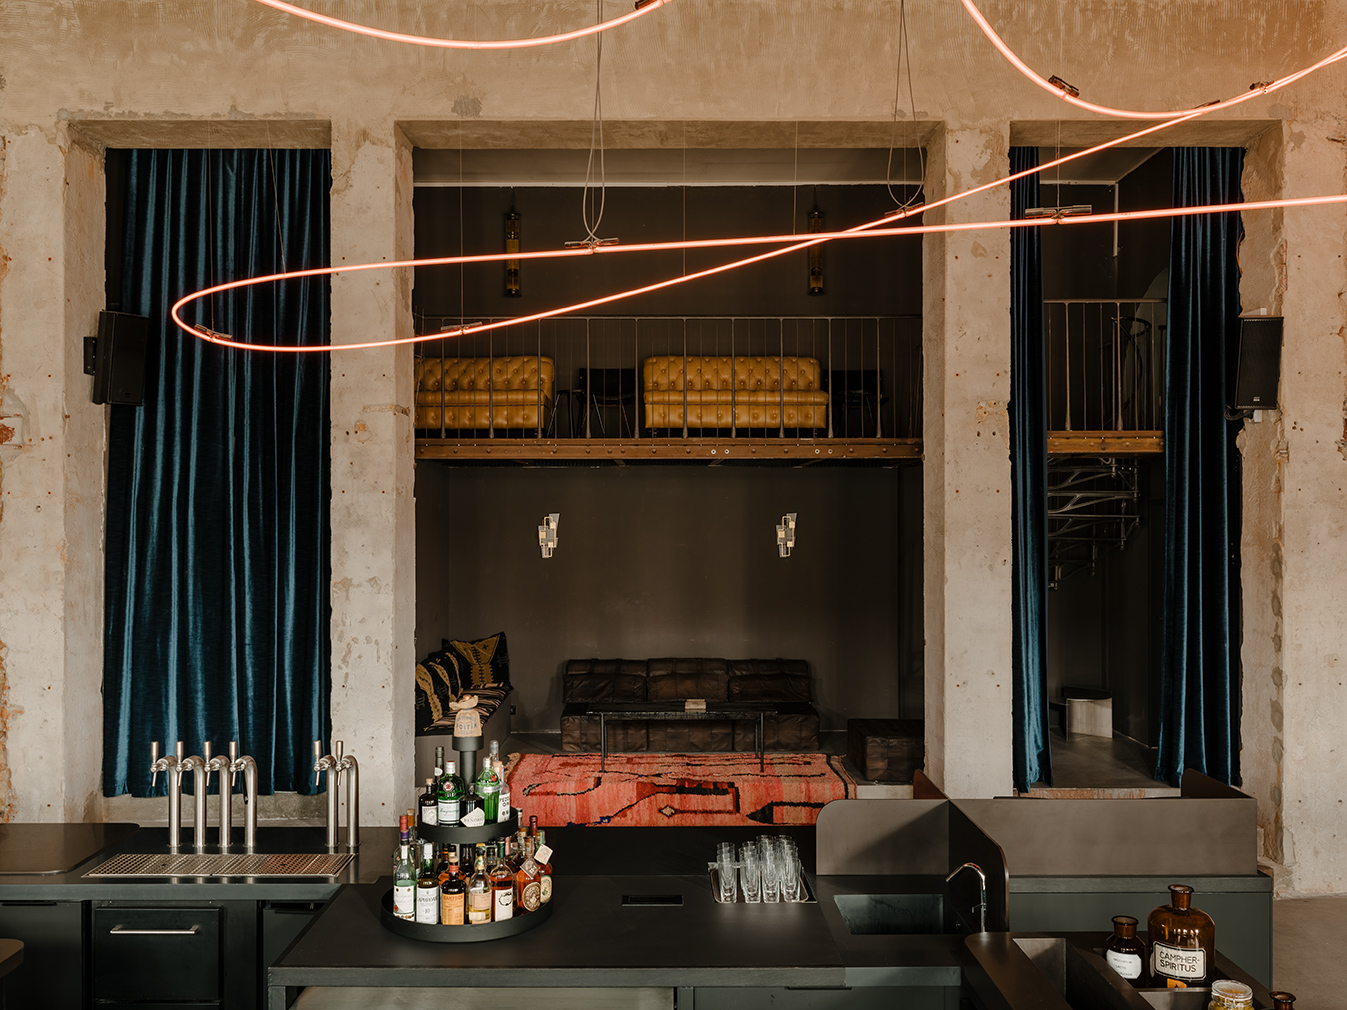 Kink bar in Berlin. The former brewery complex is now home to a moody and industrial inspired bar named Kink. Plaster and brick are contrasted by heavy velvet drapes, colourful floor cushions and a collection of art including a 100-ft-long neon rope installation by Kerim Seiler